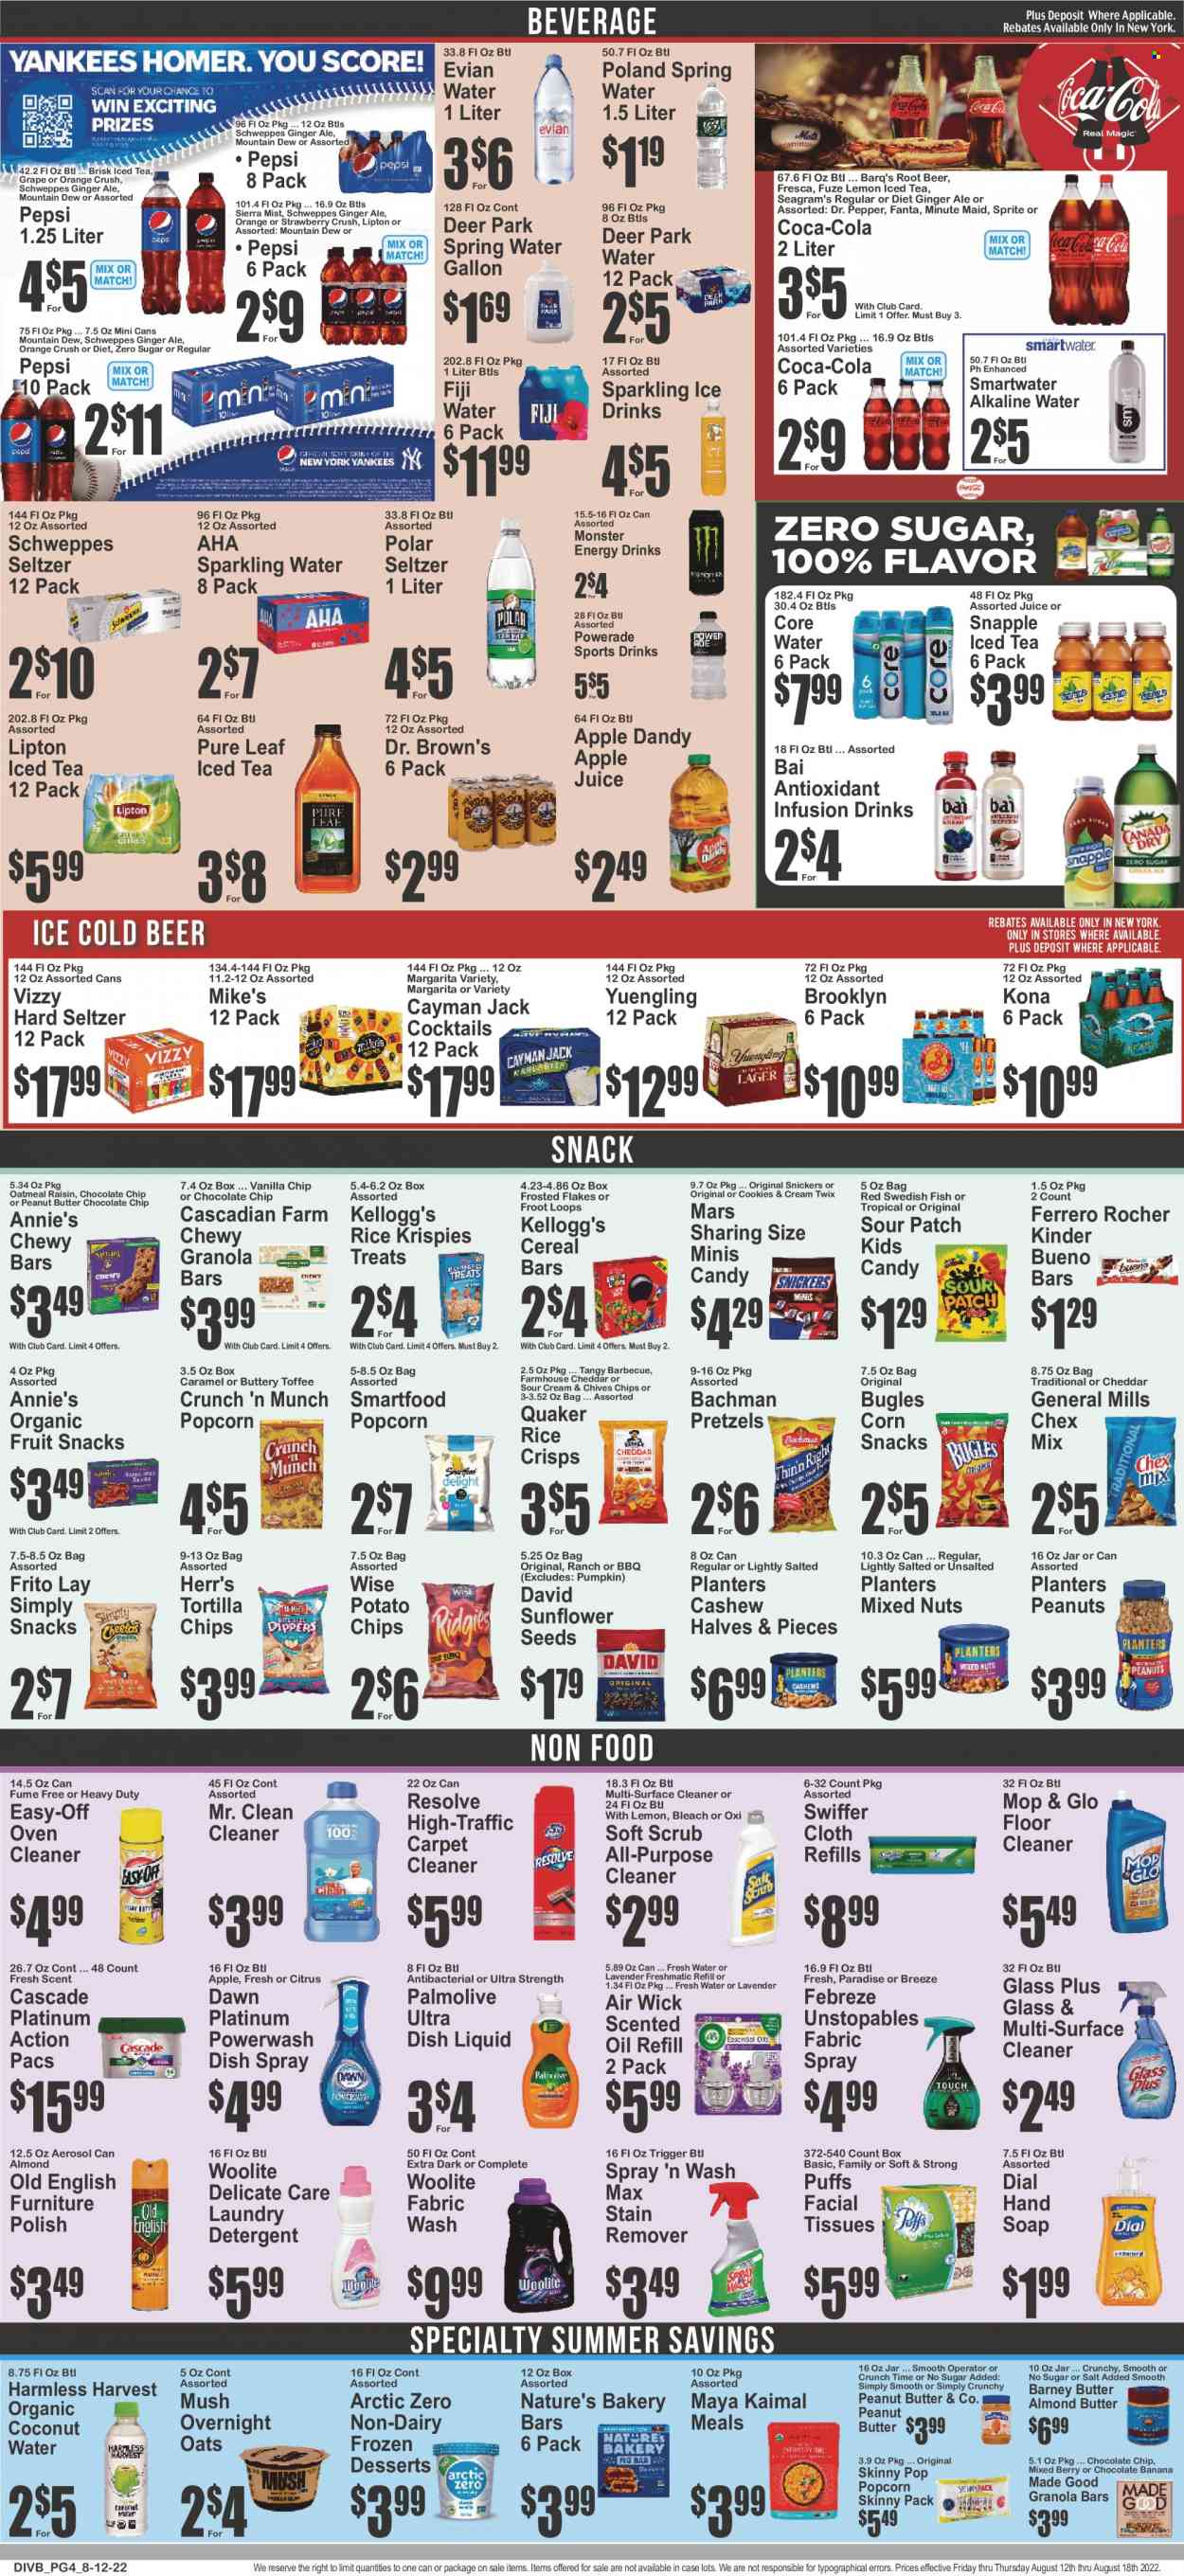 thumbnail - Food Universe Flyer - 08/12/2022 - 08/18/2022 - Sales products - pretzels, puffs, pumpkin, chives, oranges, Quaker, Annie's, cheese, almond butter, cookies, Ferrero Rocher, Snickers, Twix, Mars, toffee, cereal bar, Kellogg's, Kinder Bueno, fruit snack, Sour Patch, tortilla chips, potato chips, Smartfood, popcorn, rice crisps, Skinny Pop, Chex Mix, oatmeal, cereals, granola bar, Rice Krispies, Frosted Flakes, oil, peanuts, sunflower seeds, mixed nuts, Planters, apple juice, Coca-Cola, ginger ale, Mountain Dew, Schweppes, Sprite, Powerade, Pepsi, juice, Fanta, energy drink, Monster, Lipton, ice tea, Dr. Pepper, coconut water, Monster Energy, Snapple, Dr. Brown's, Sierra Mist, Bai, fruit punch, spring water, sparkling water, Smartwater, alkaline water, Evian, Pure Leaf, Hard Seltzer, beer, tissues, detergent, Febreze, surface cleaner, cleaner, bleach, floor cleaner, stain remover, Woolite, Swiffer, Cascade, Unstopables, laundry detergent, dishwashing liquid, hand soap, Palmolive, Dial, soap, facial tissues, polish, Air Wick, scented oil, Yuengling. Page 4.